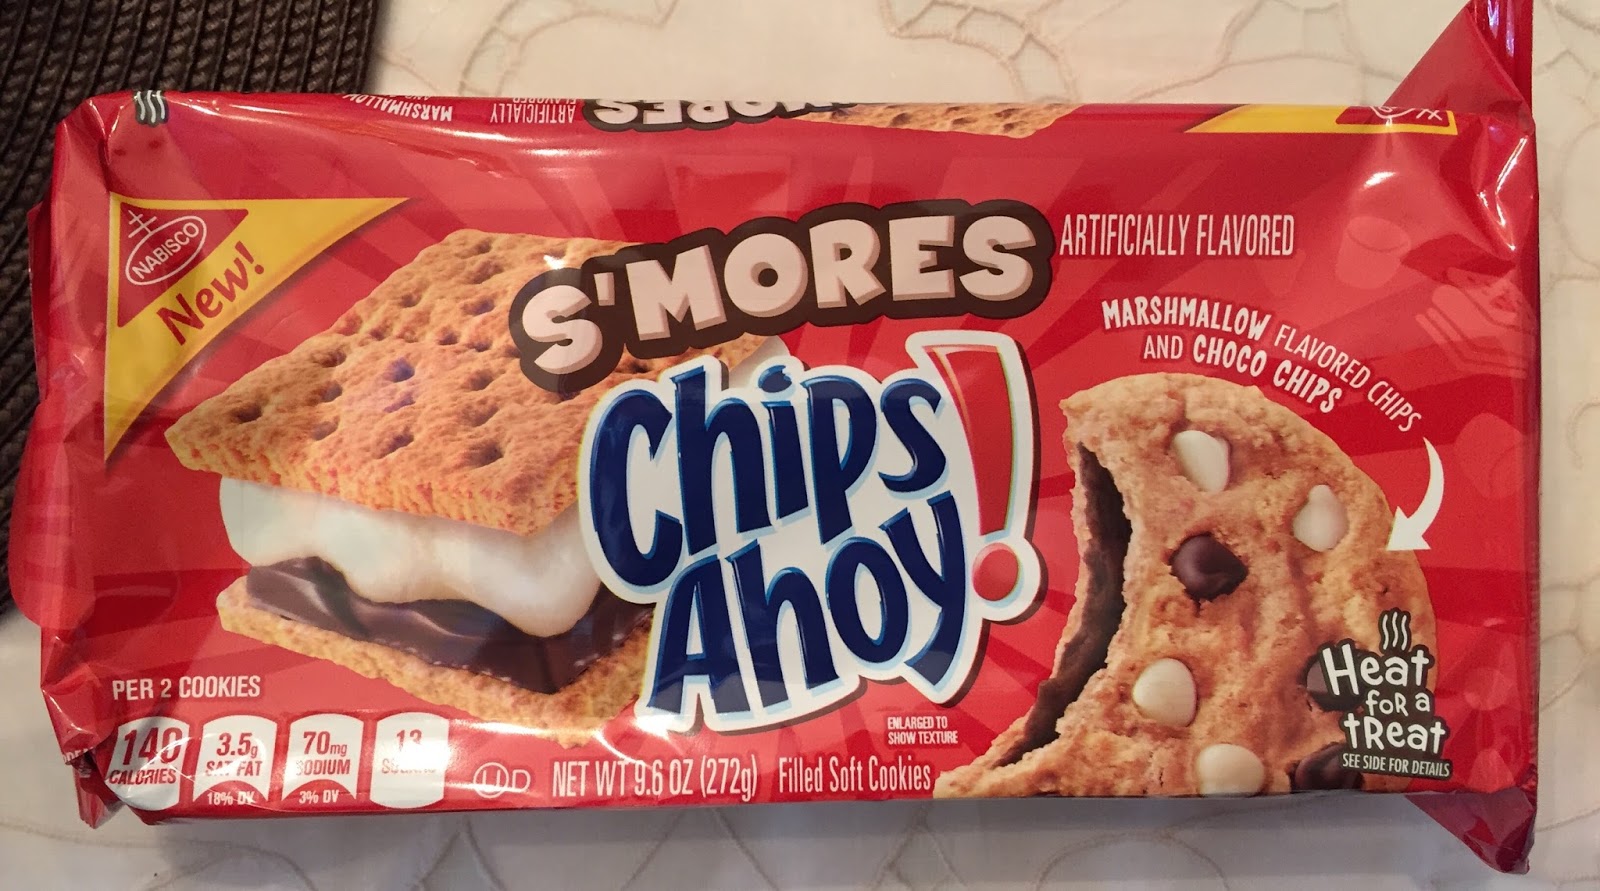 I'm Made of Sugar! - Chihiro's food blog: S'mores Chips Ahoy